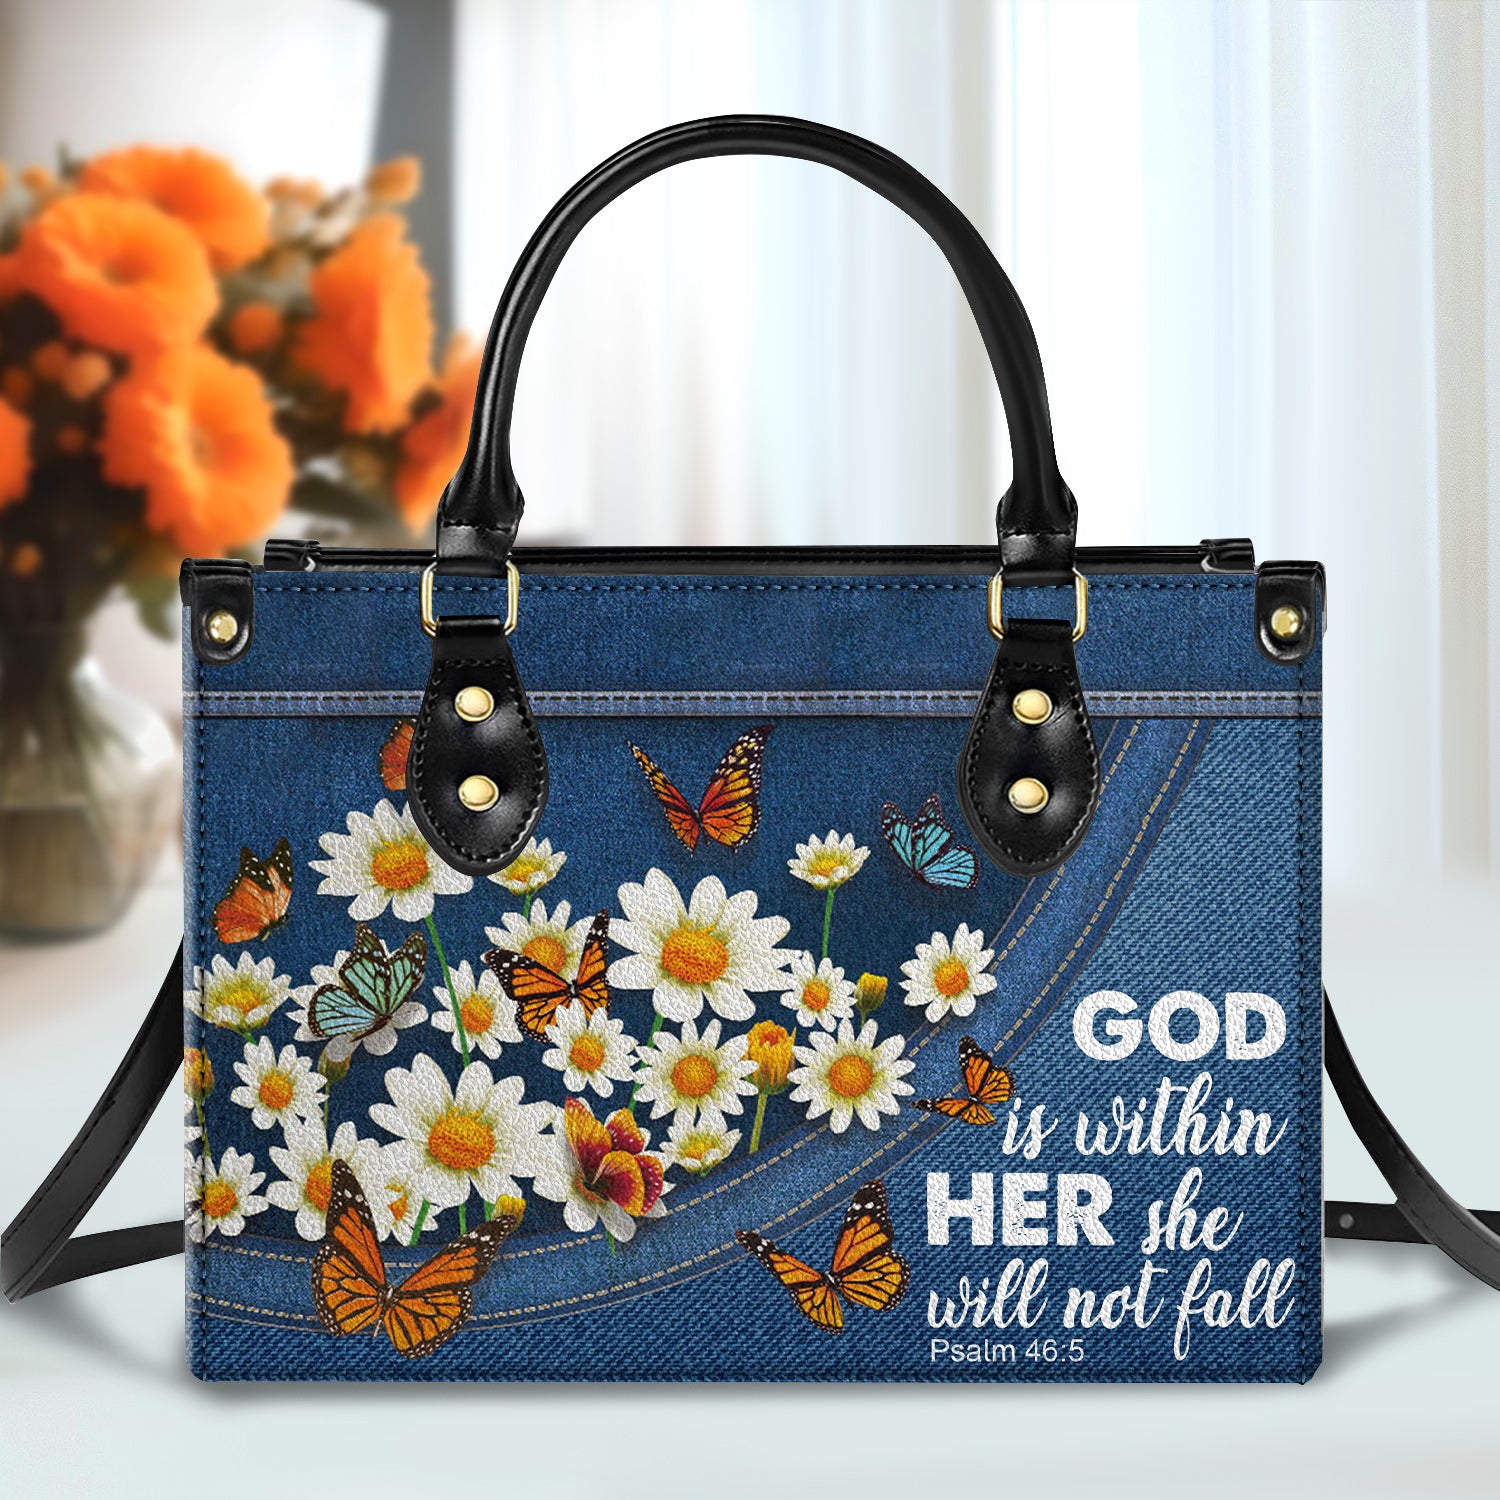 Daisy Garden She Will Not Fall Personalized Zippered Leather Handbag With Handle Christian Gift Religious Gift For Women